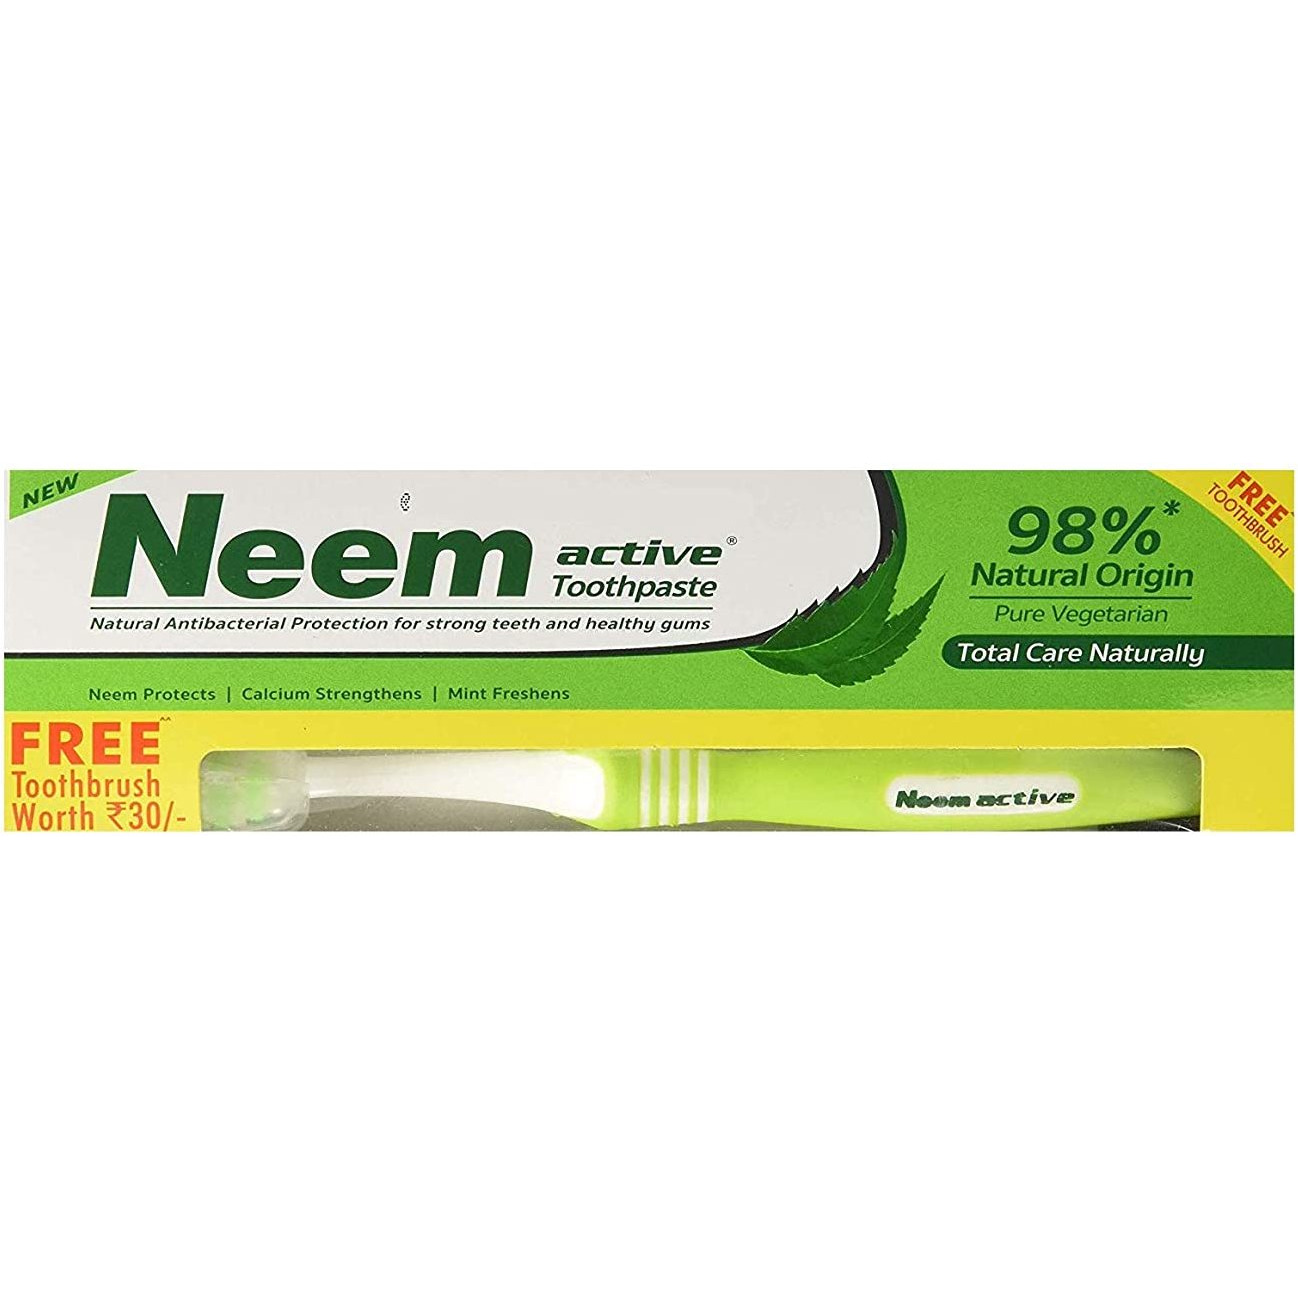 Neem Advance Herbal Toothpaste (2 Pack) - 200 Gm Each